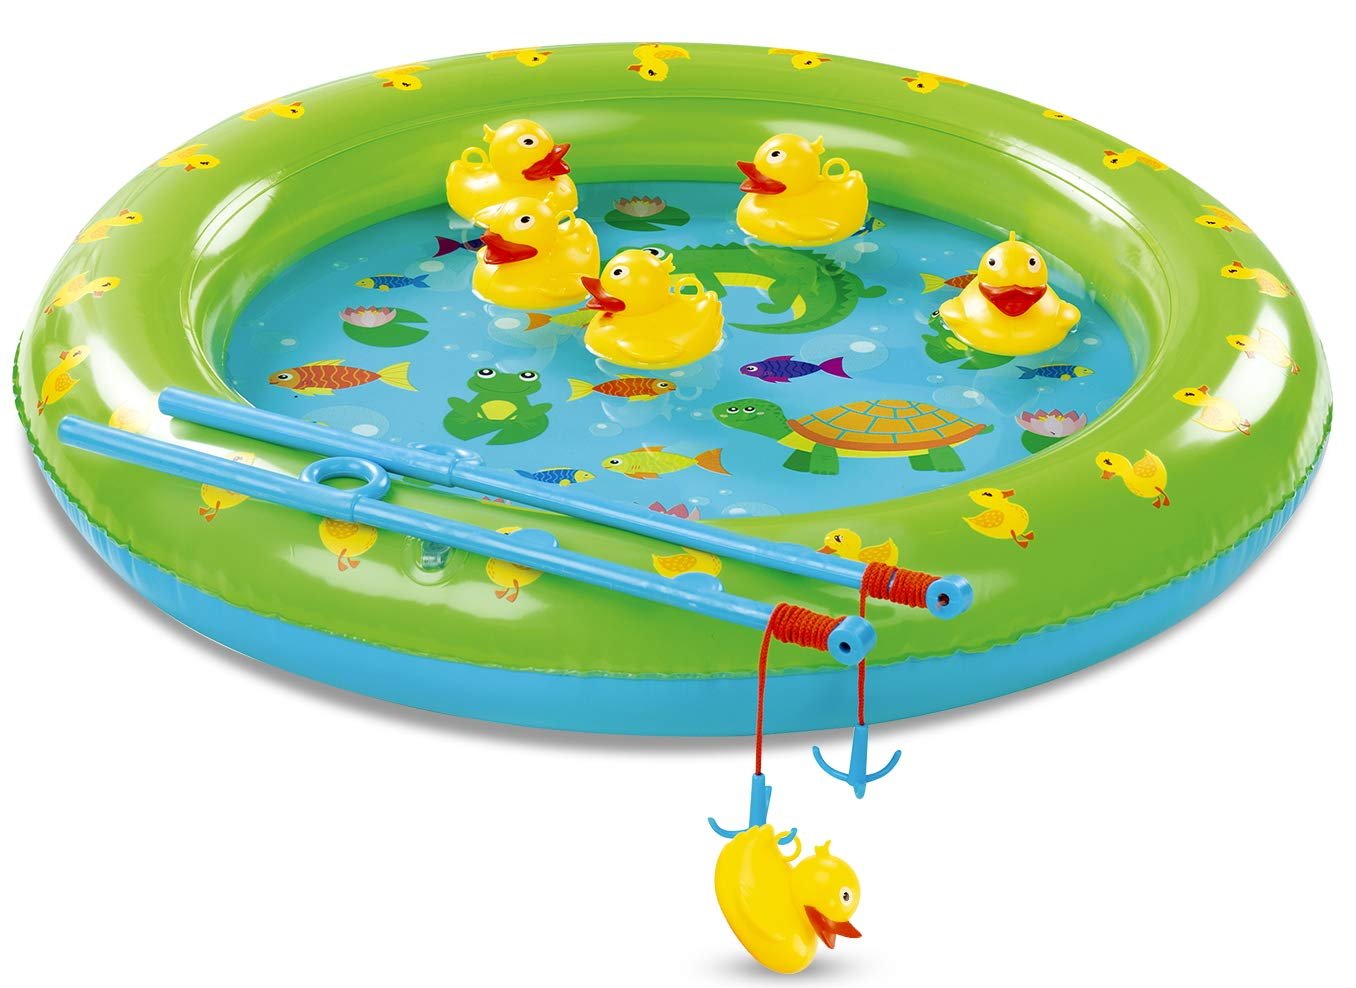 Inflatable Duck Fishing Game for Kids - Small Size, 2 Poles, 6 Ducks - Fun Carnival & Outdoor Party Toy - Free Shipping & Returns